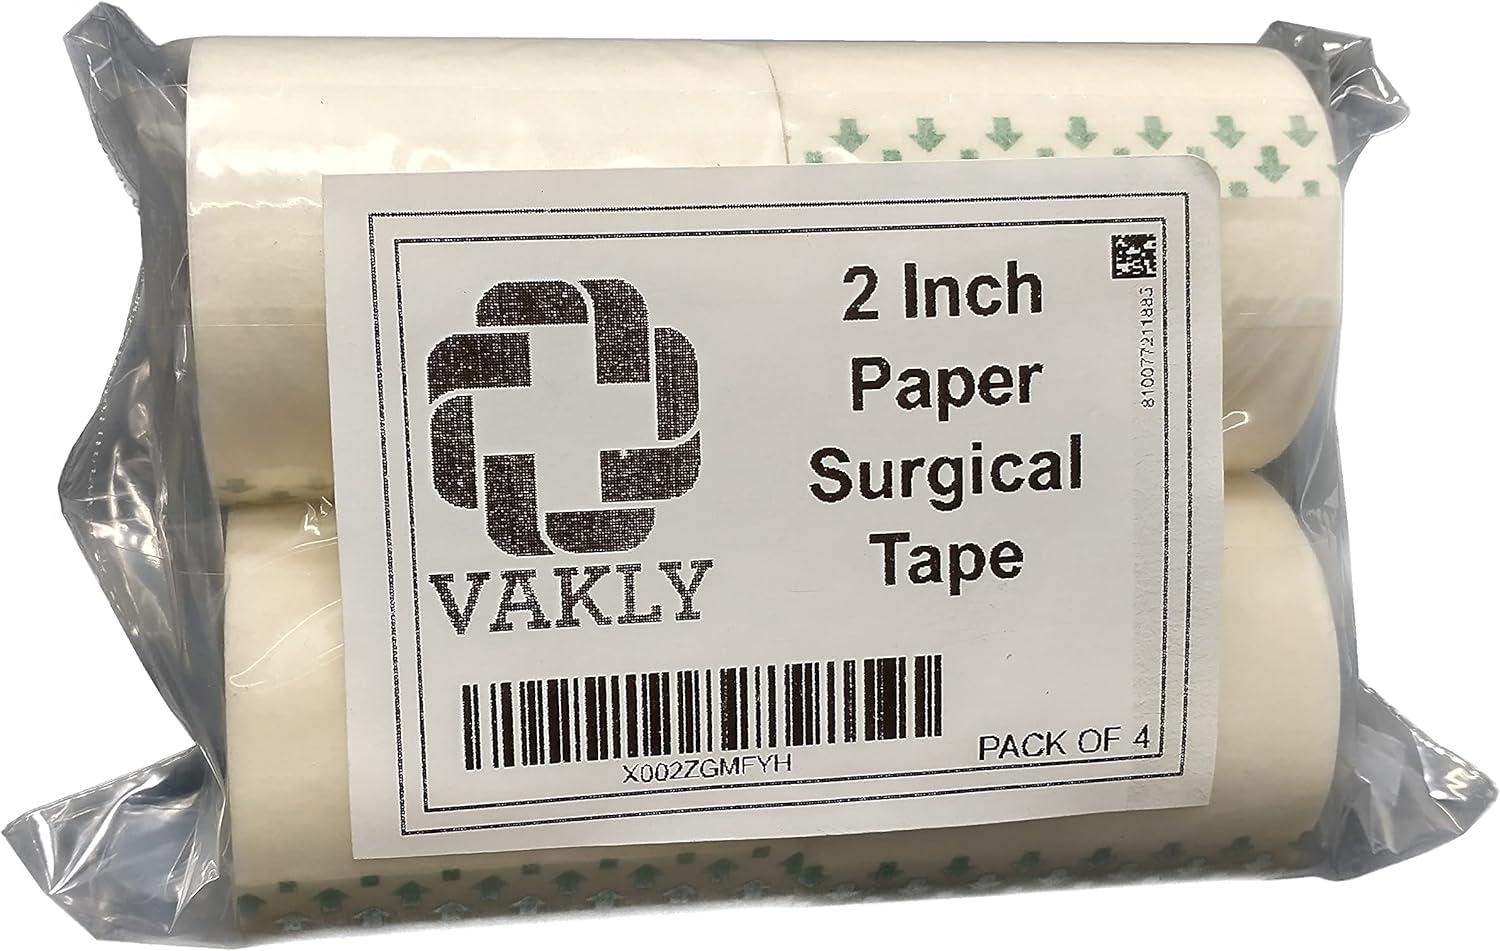 Paper Medical First Aid Surgical Tape 1 x 10 Yards [Pack of 6 Rolls]  Lightweight Breathable Microporous Self Adhesive Latex Free Hypoallergenic